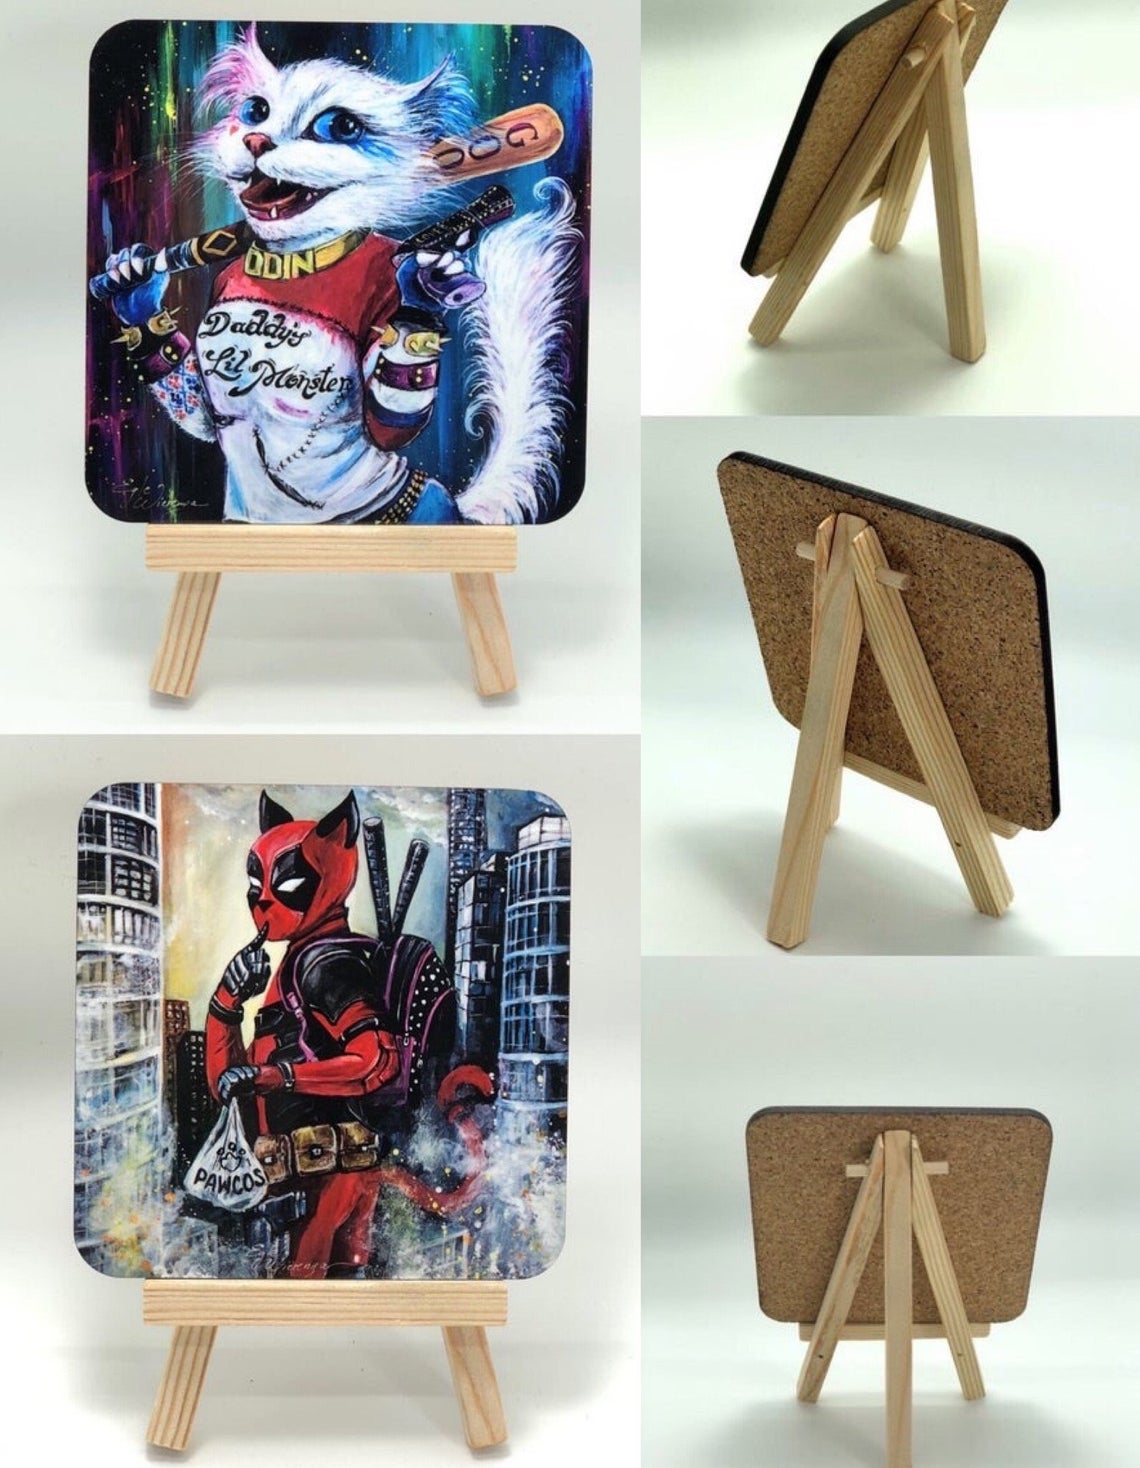 COASTERS SINGLES, Images of your choice! See Directions below